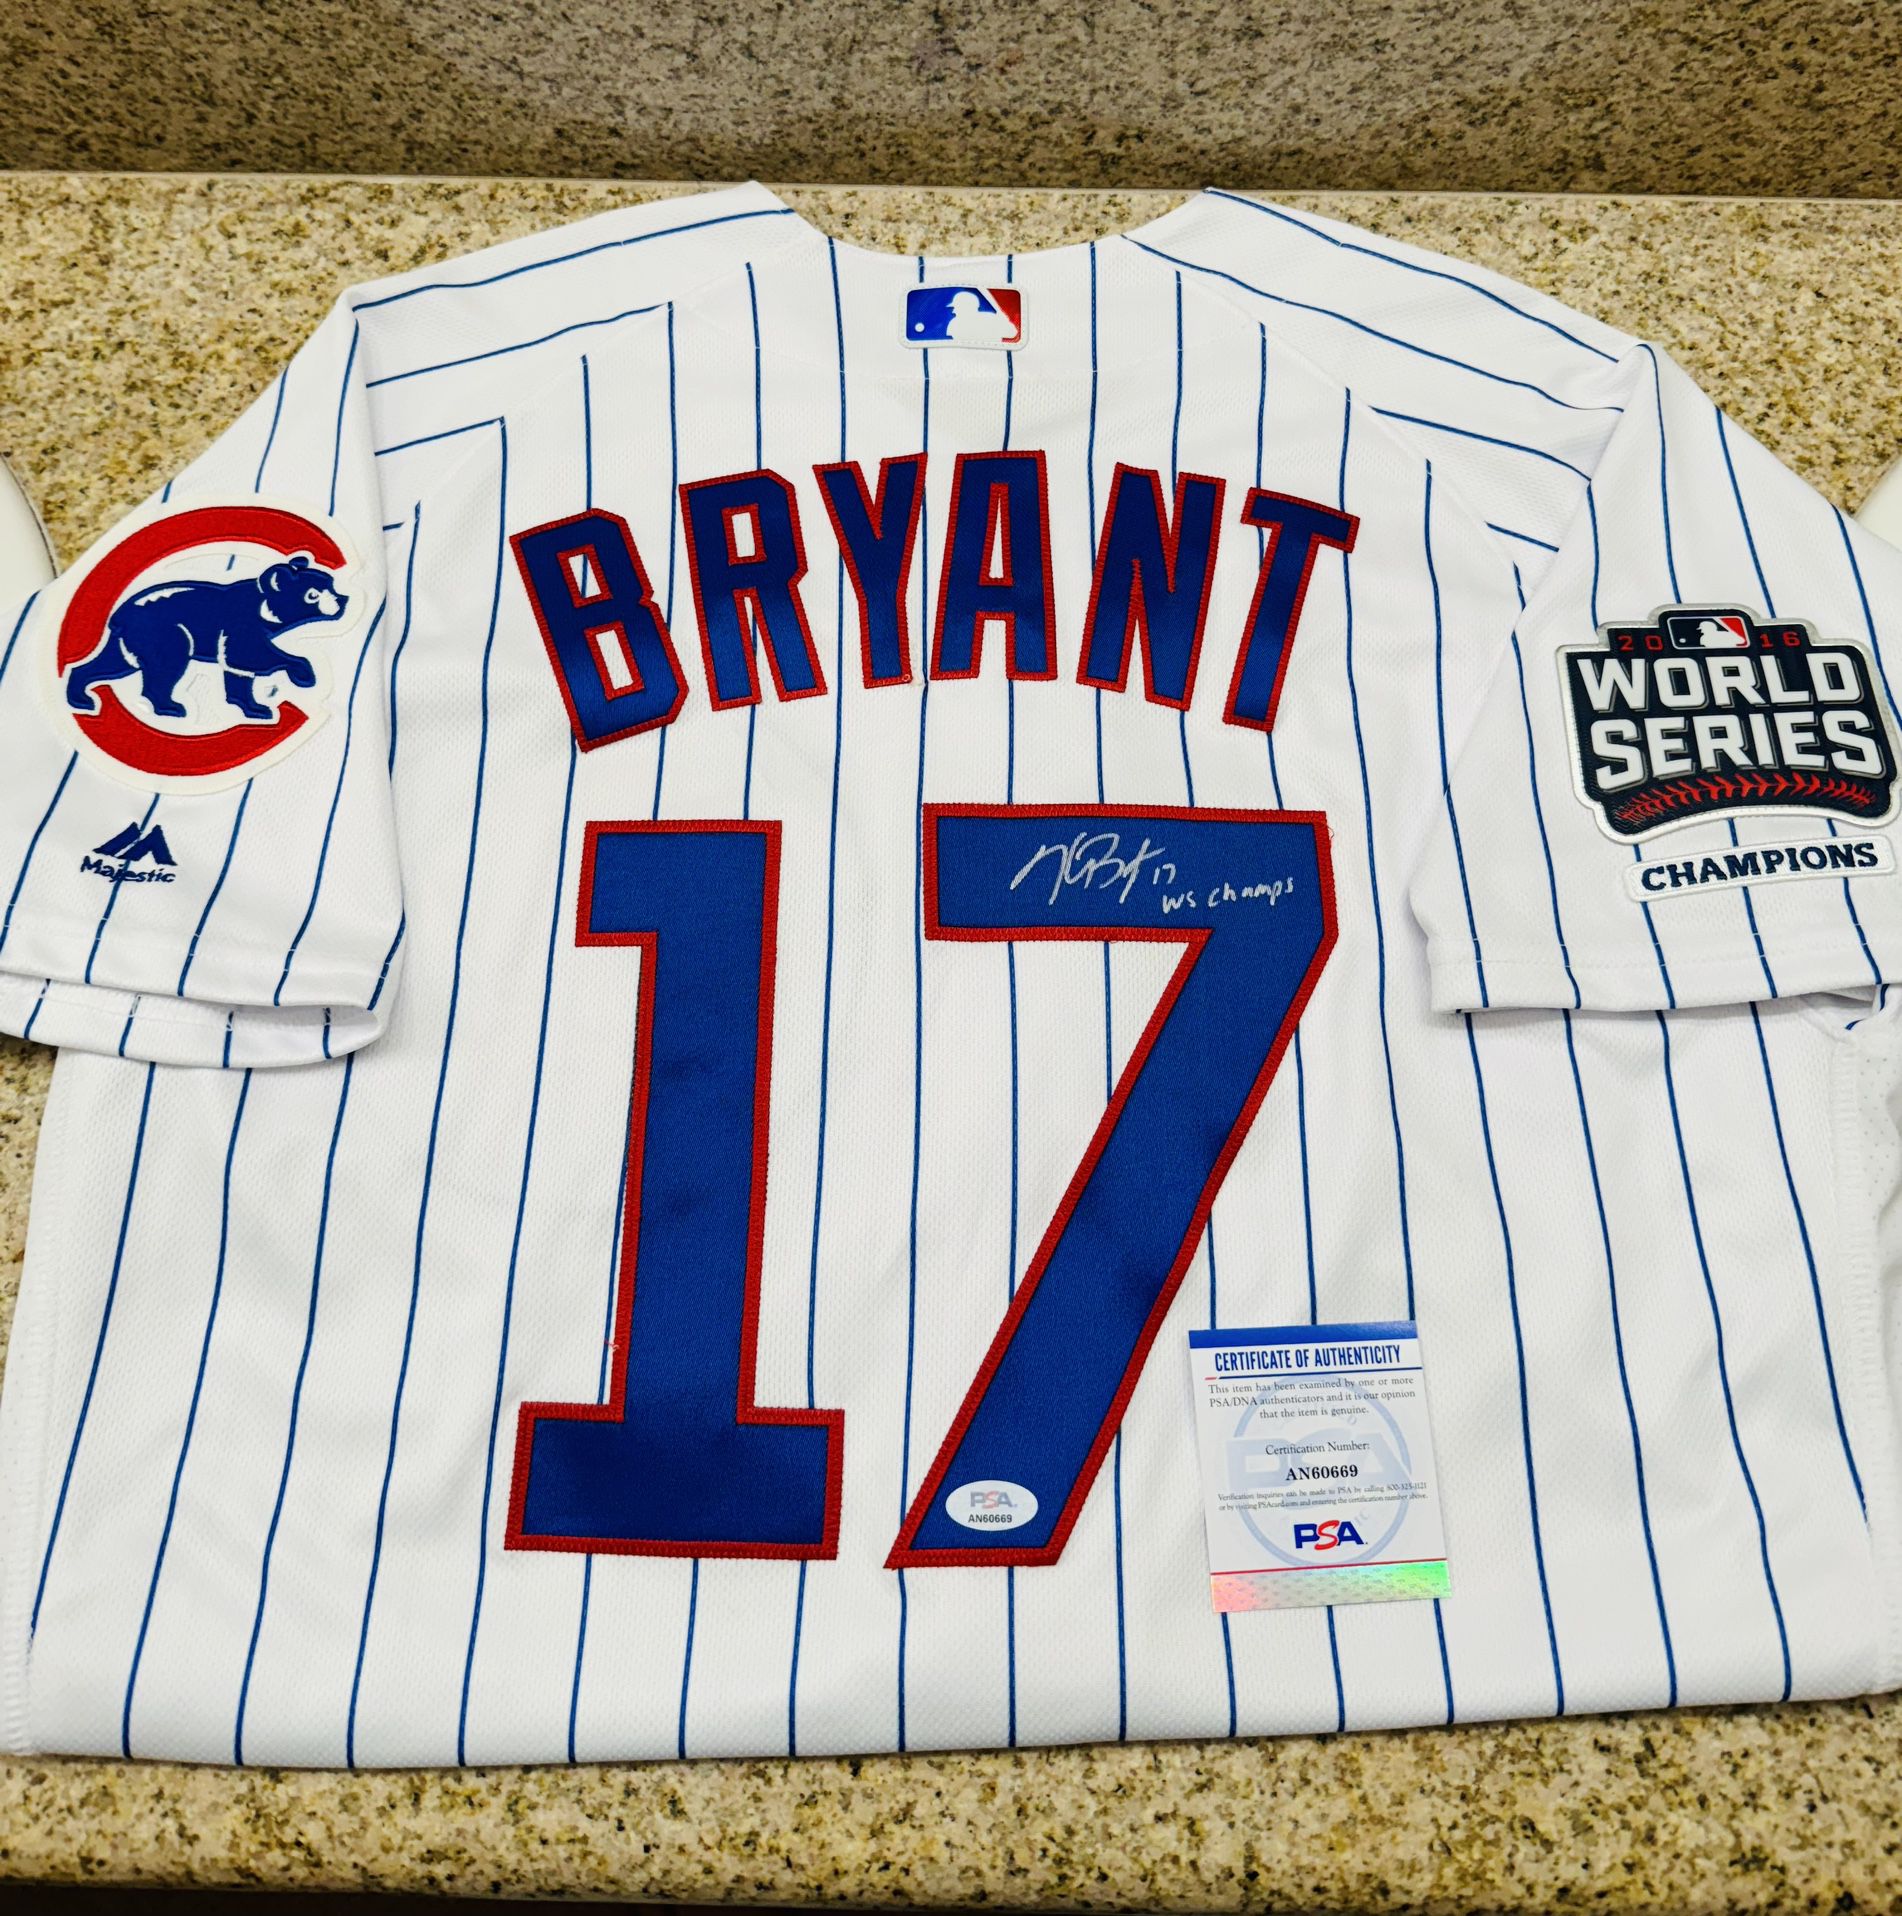 Kris Bryant Signed Chicago Cubs Authentic 2016 World Series Champions Jersey 44 PSA 